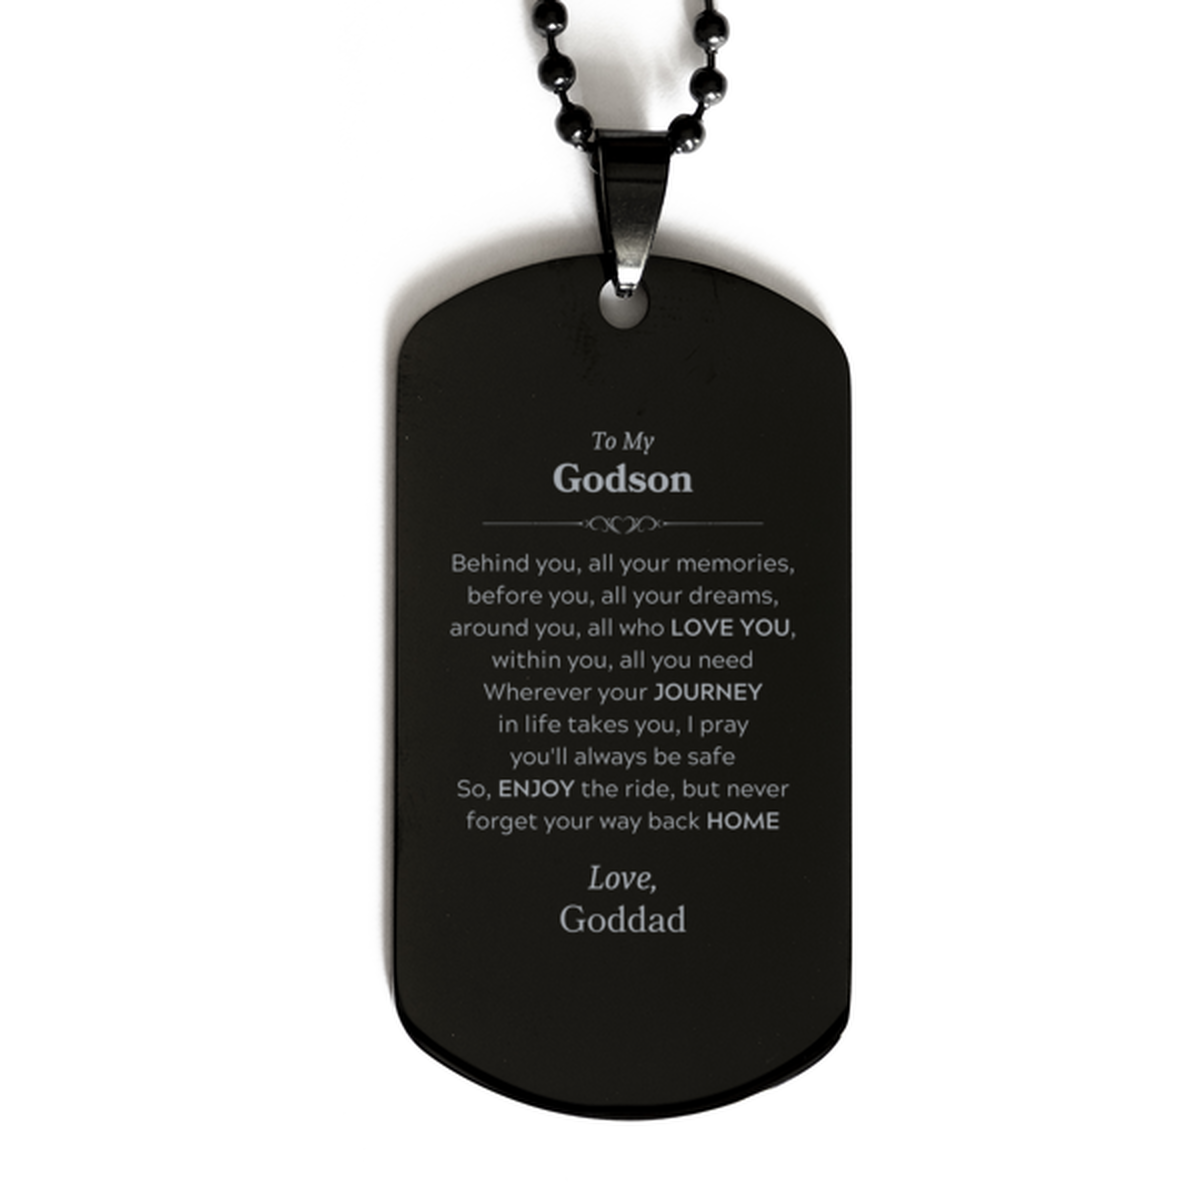 To My Godson Graduation Gifts from Goddad, Godson Black Dog Tag Christmas Birthday Gifts for Godson Behind you, all your memories, before you, all your dreams. Love, Goddad